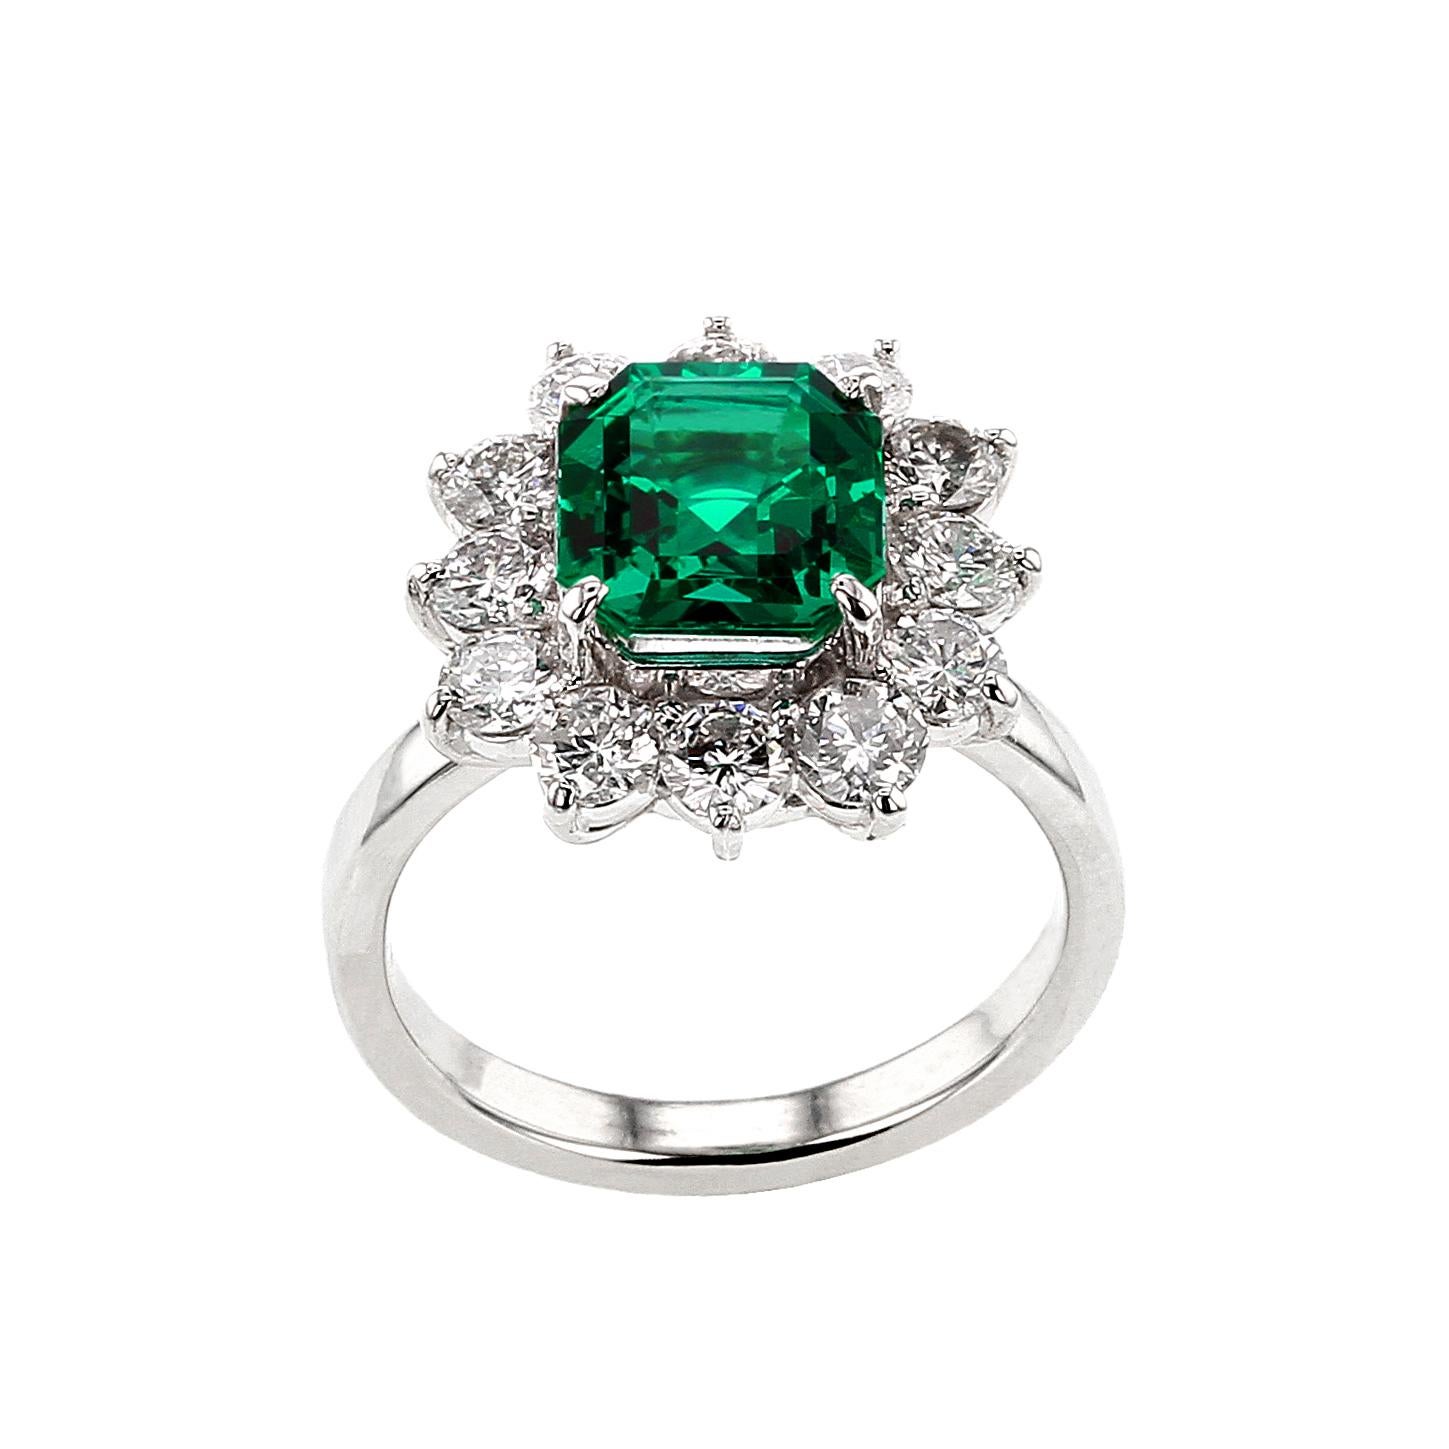 An exceptional and rare cluster ring centered with a very fine quality square shape step-cut no oil emerald weighing well over two carats accented with a circular row of round, brilliant-cut diamonds, set in Platinum. The emerald accompanies a